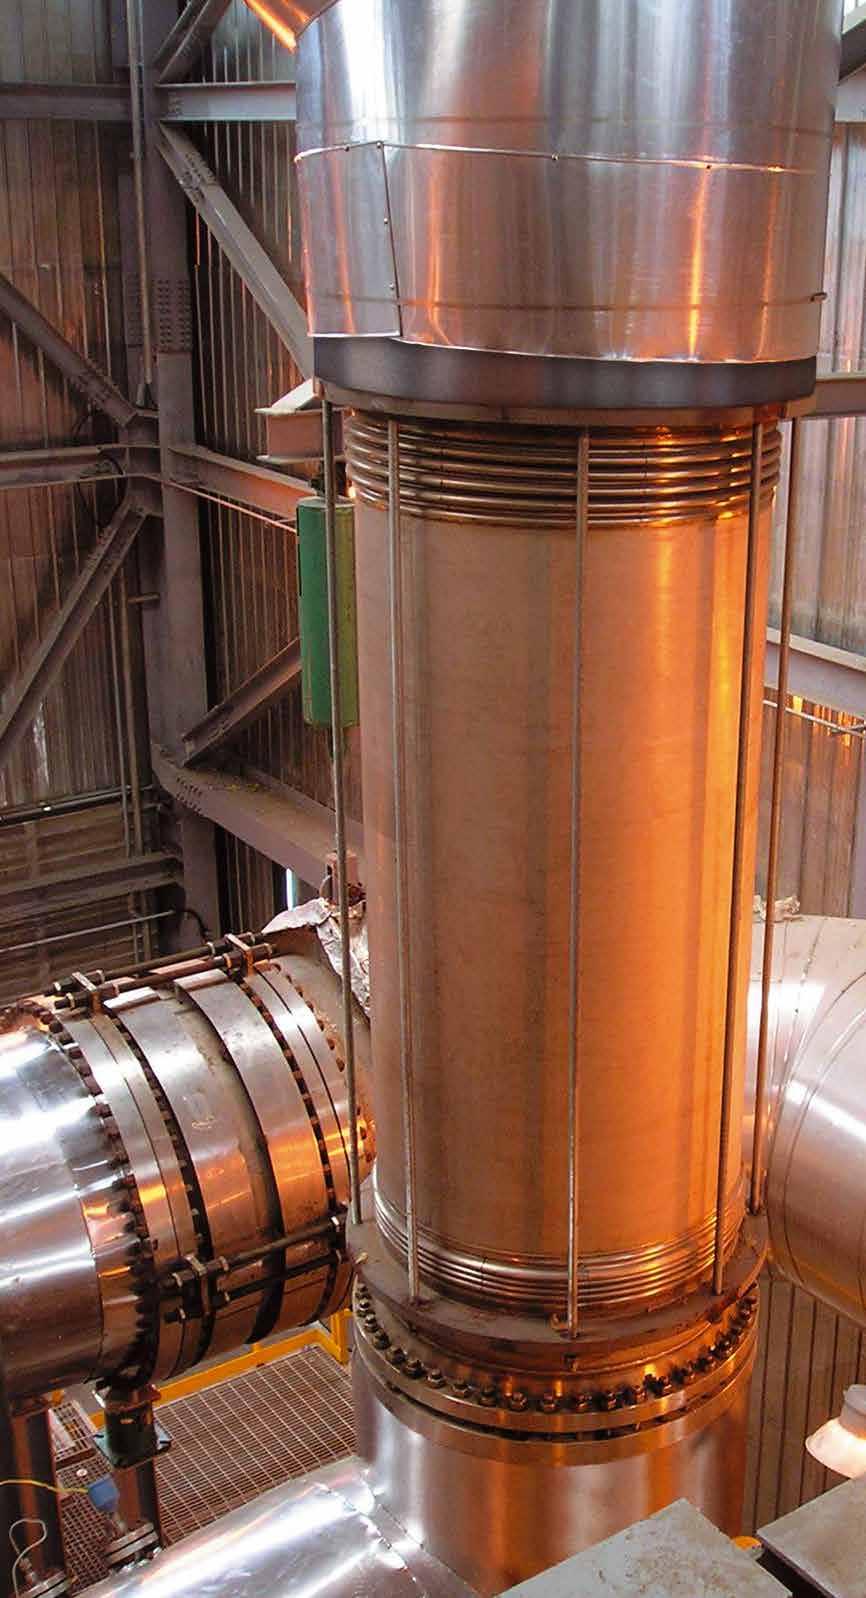 Application areas: Blowers and fans Cement industry Chemical industry Glass industry Incinerators Metal finishing Offshore industry